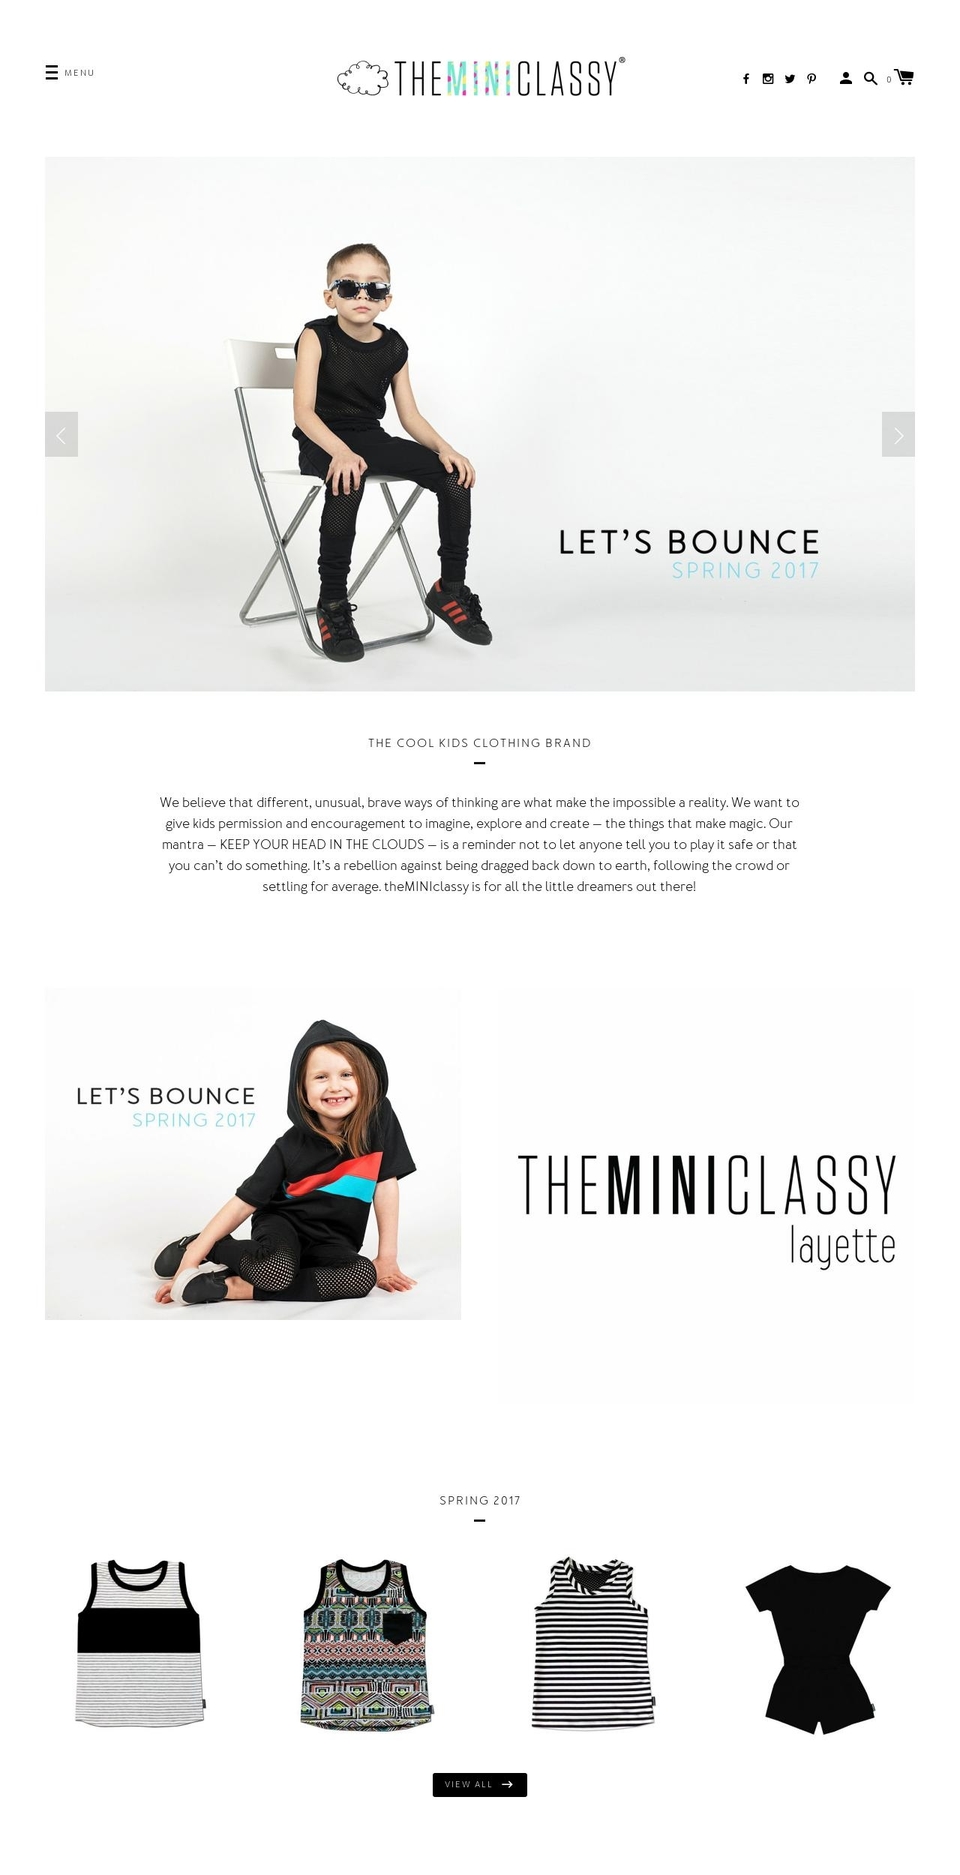 Label Shopify theme site example theminiclassy.net